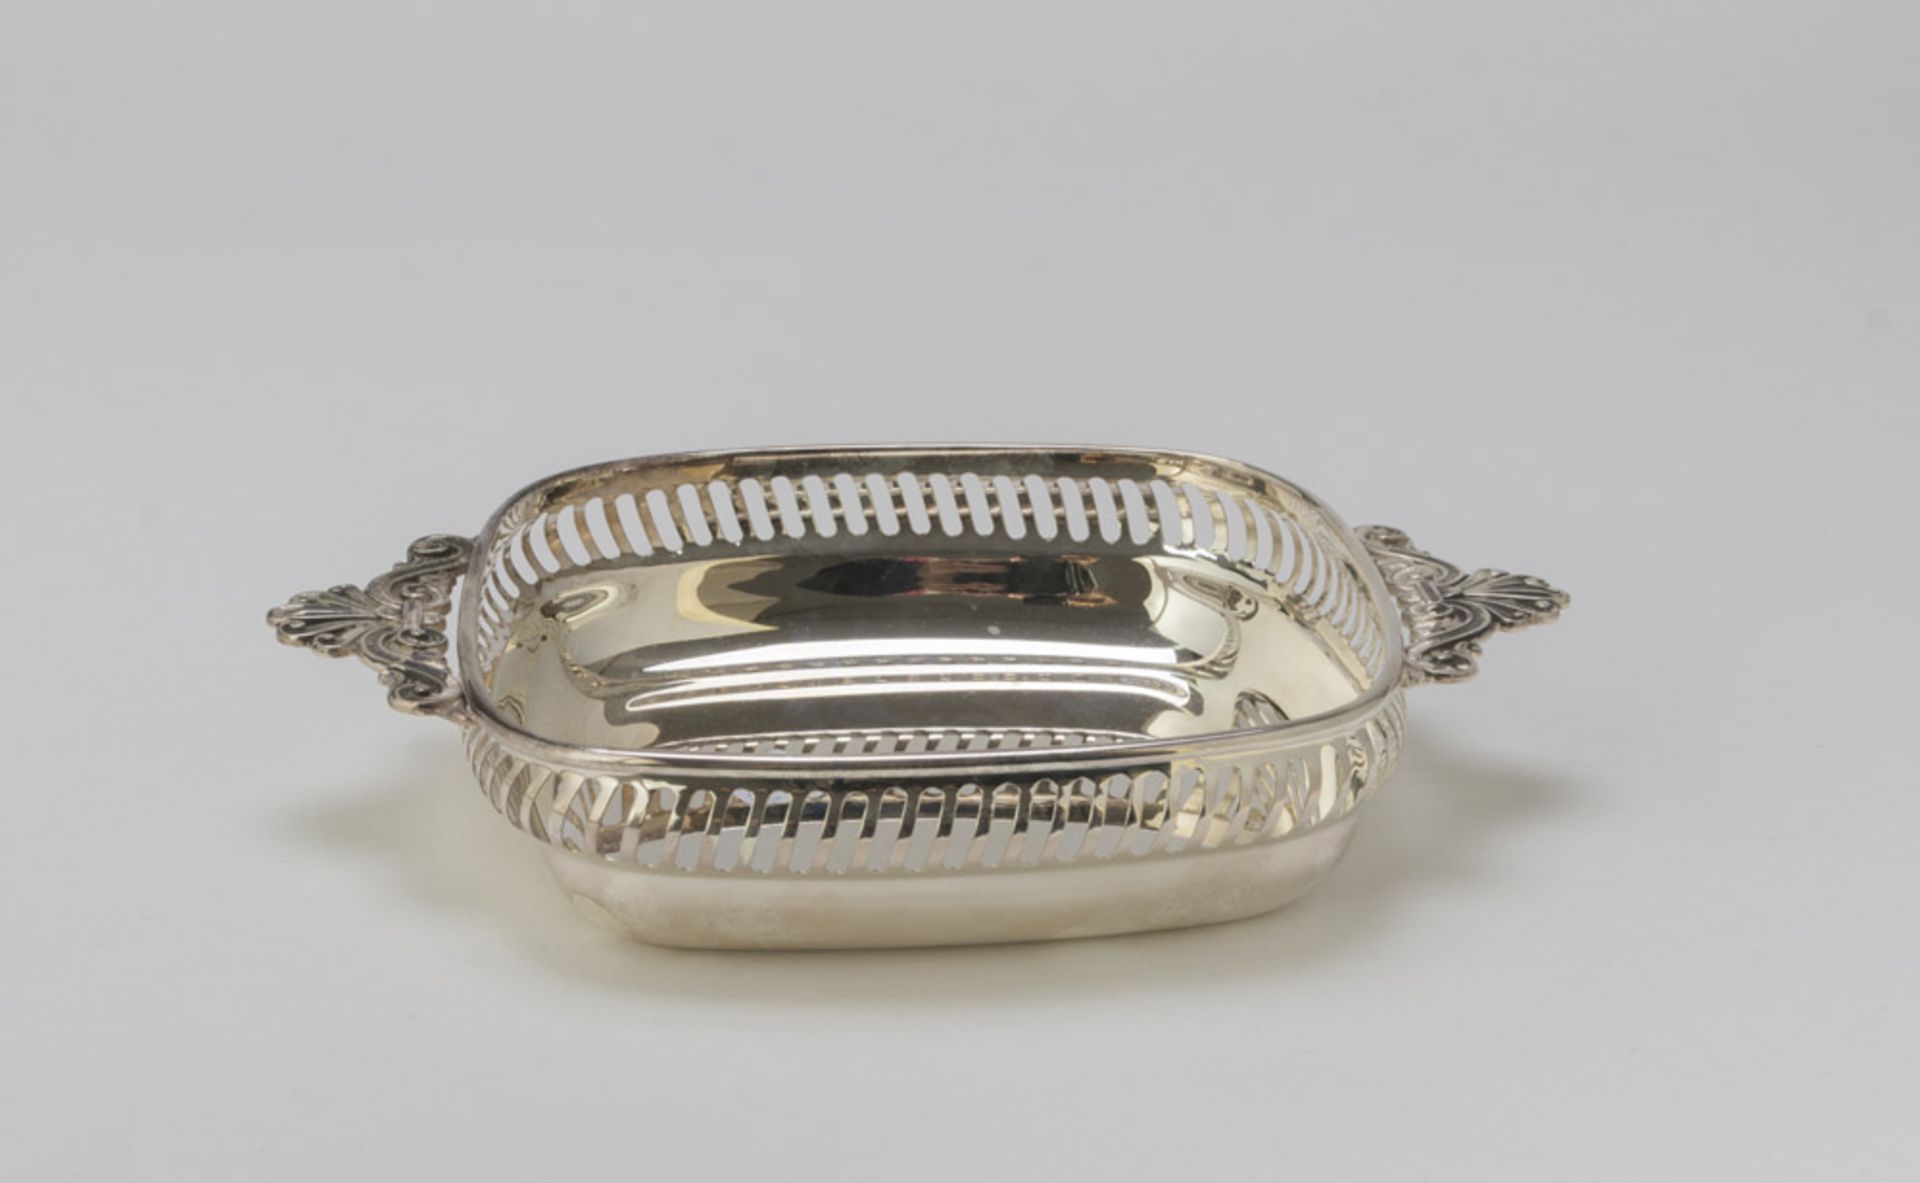 SMALL BASIN IN SILVER-PLATED METAL – 20TH CENTURY